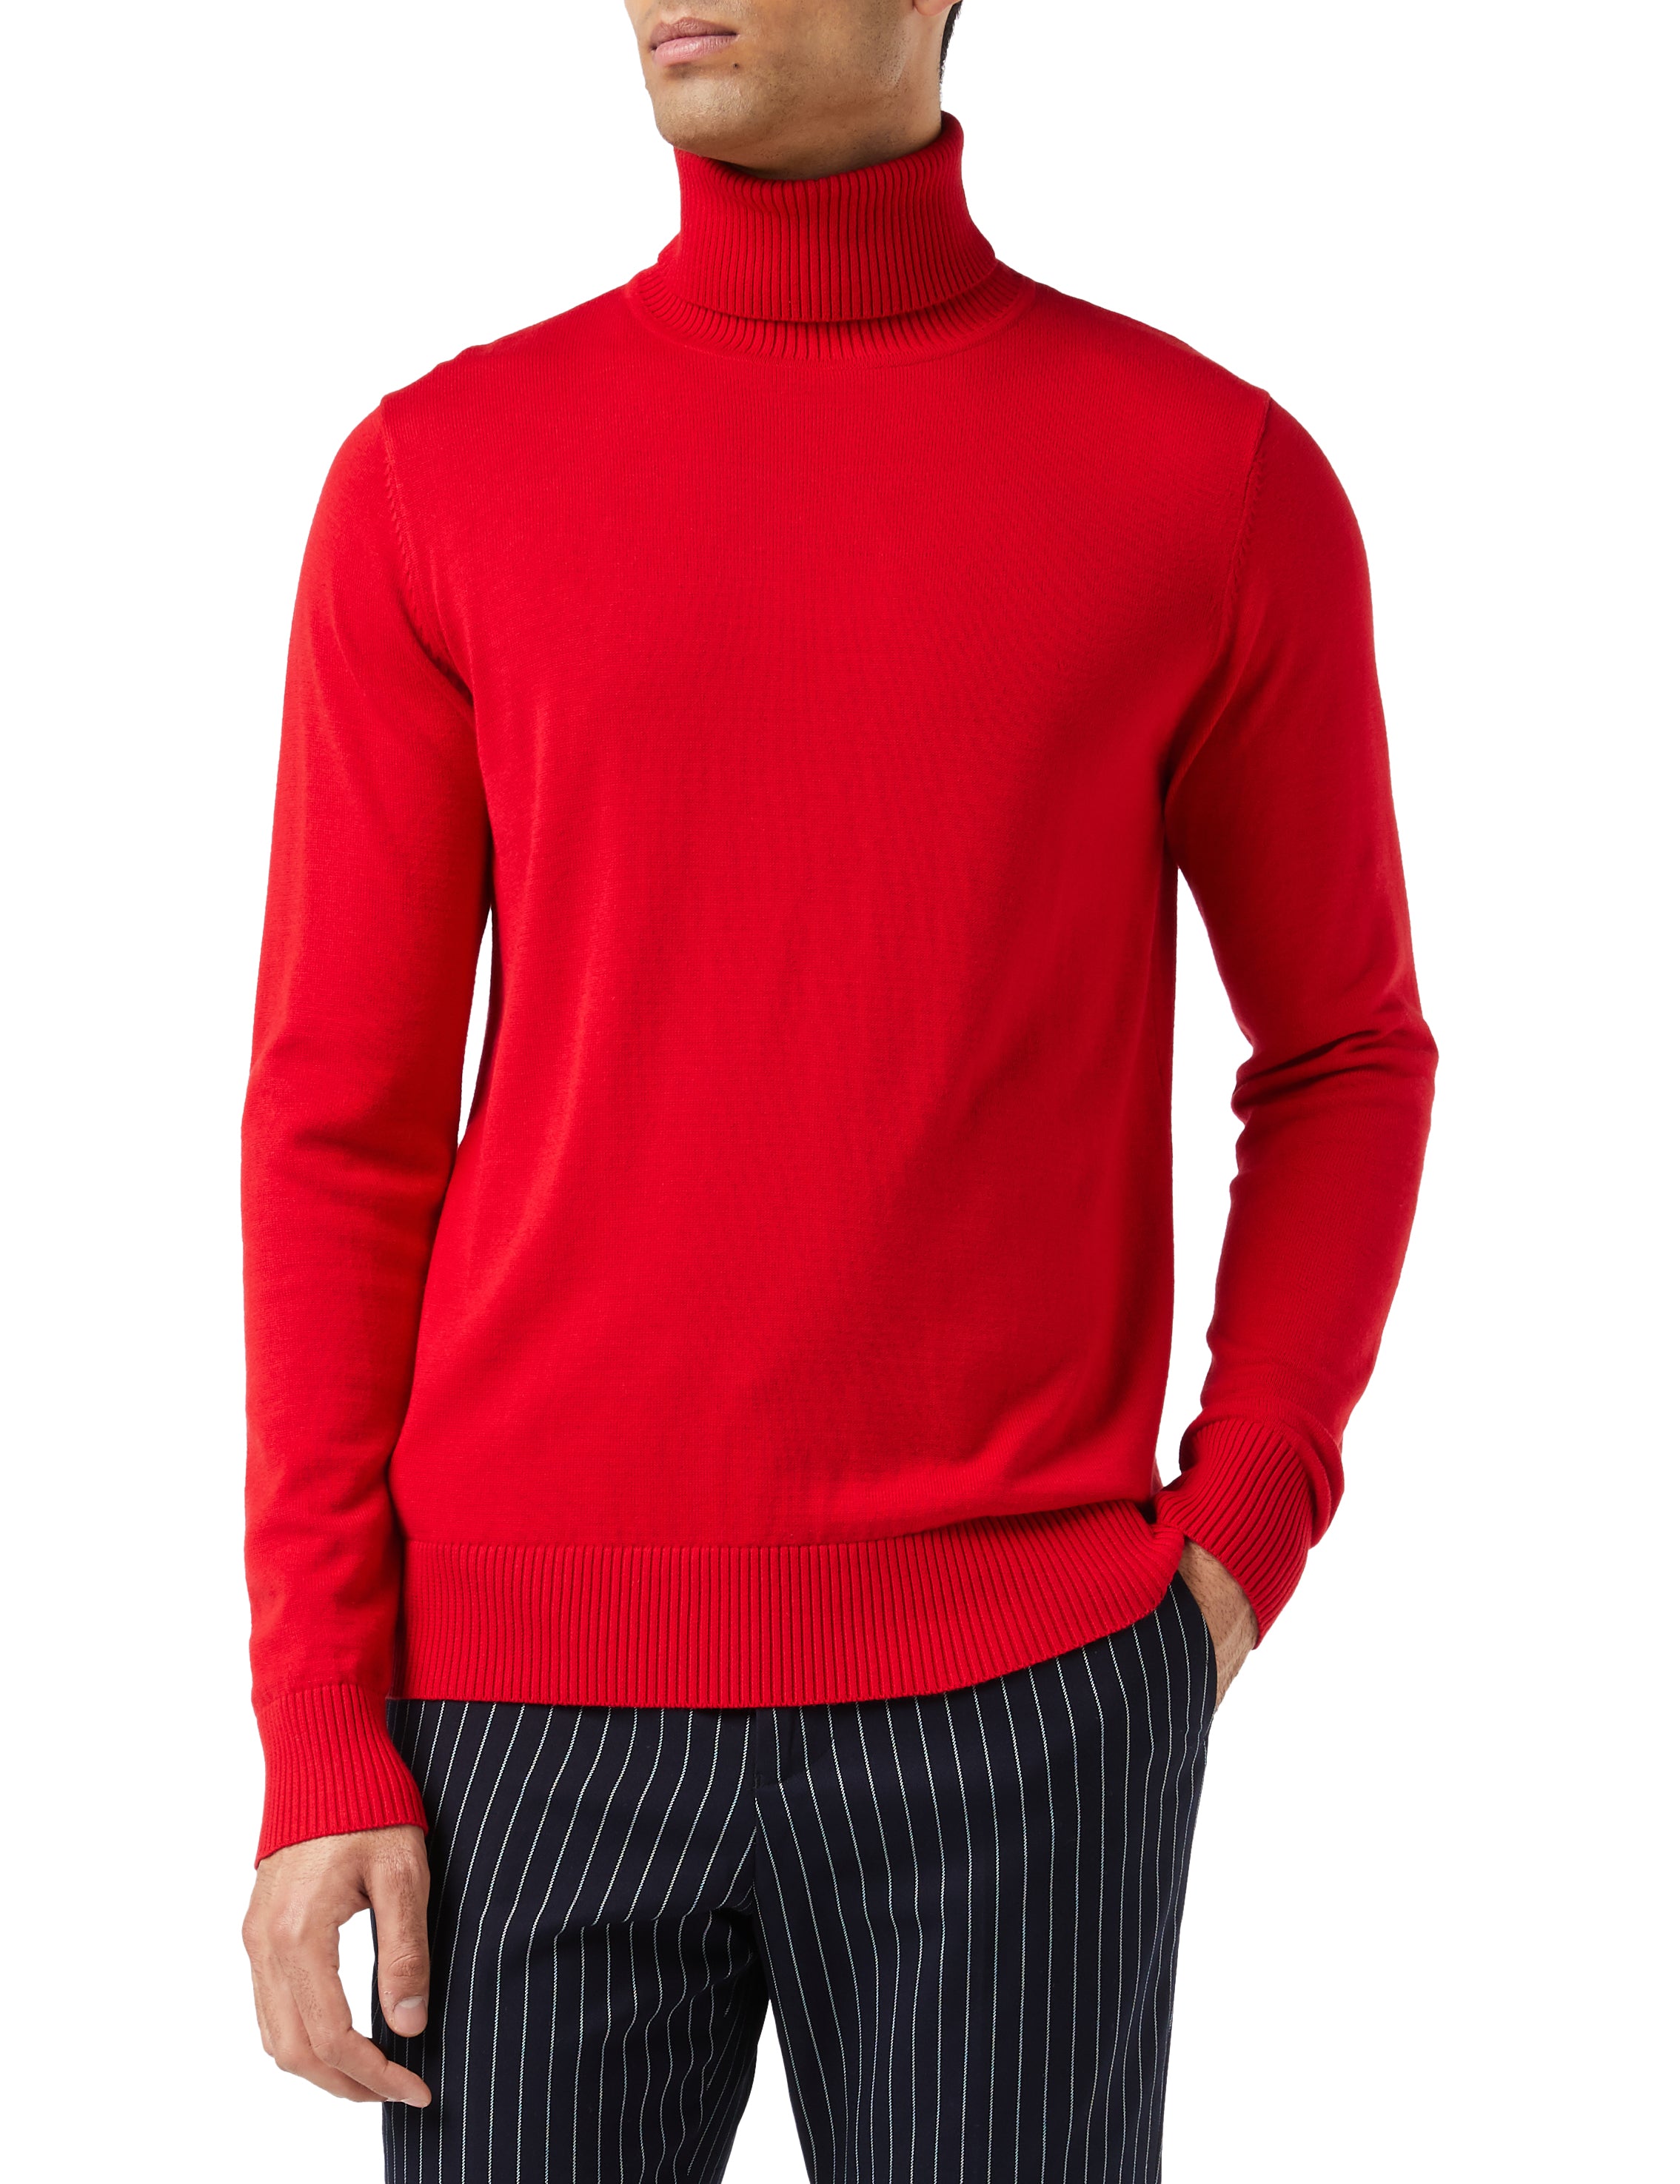 Mens Roll Neck Red Jumper Soft Cotton Fine Knitted